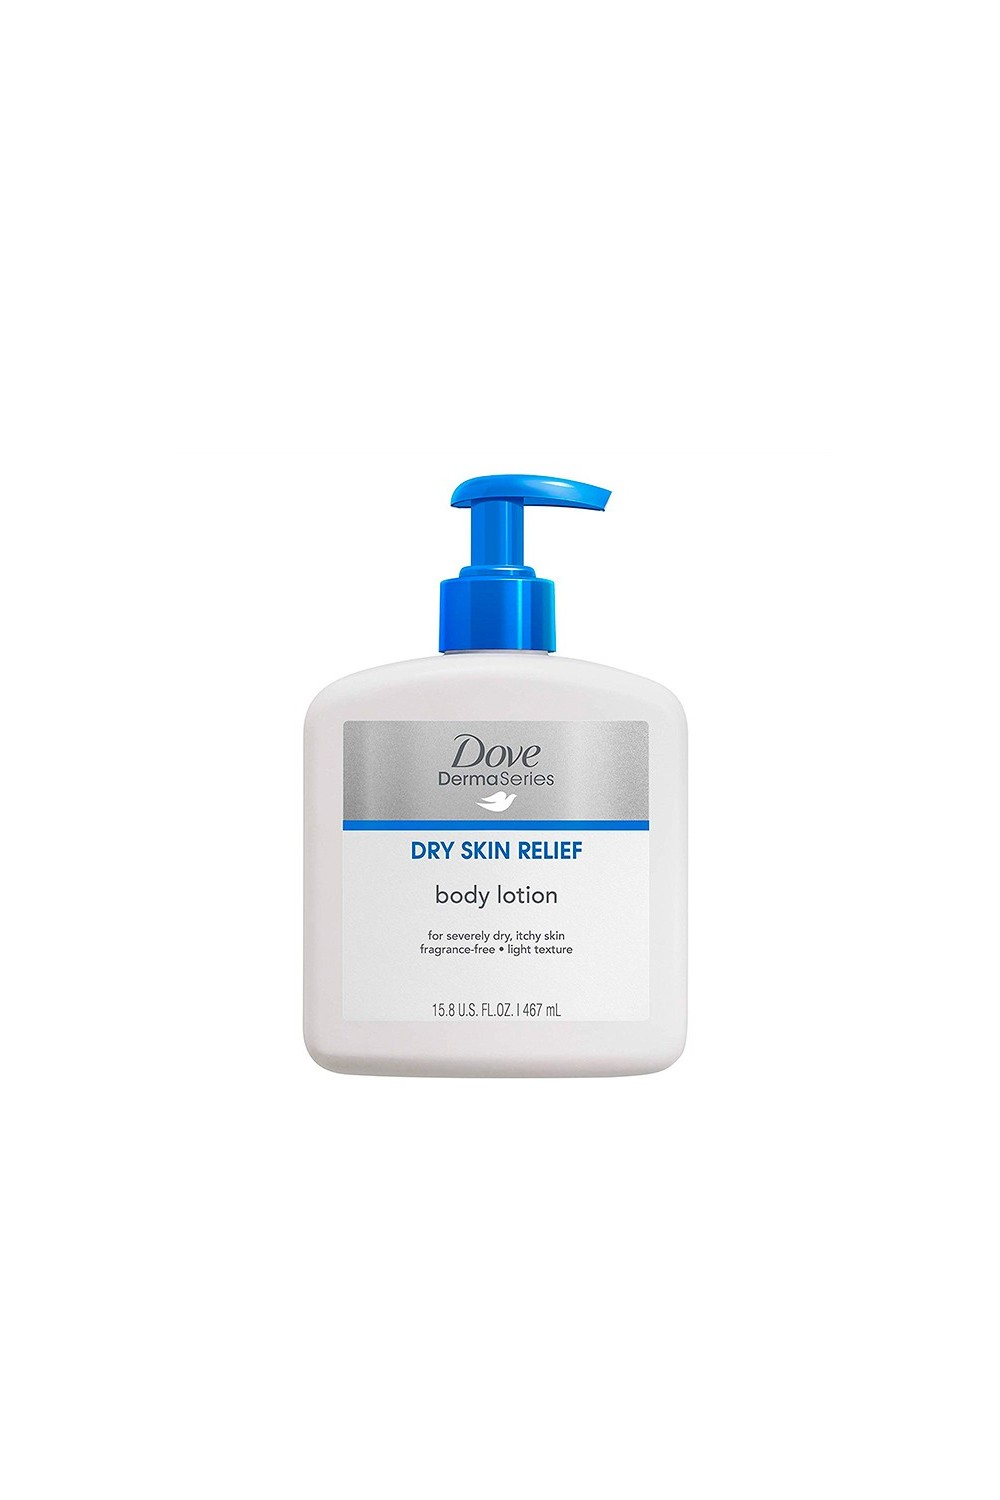 Dove Dermaseries Soothing Itch Balm 300ml